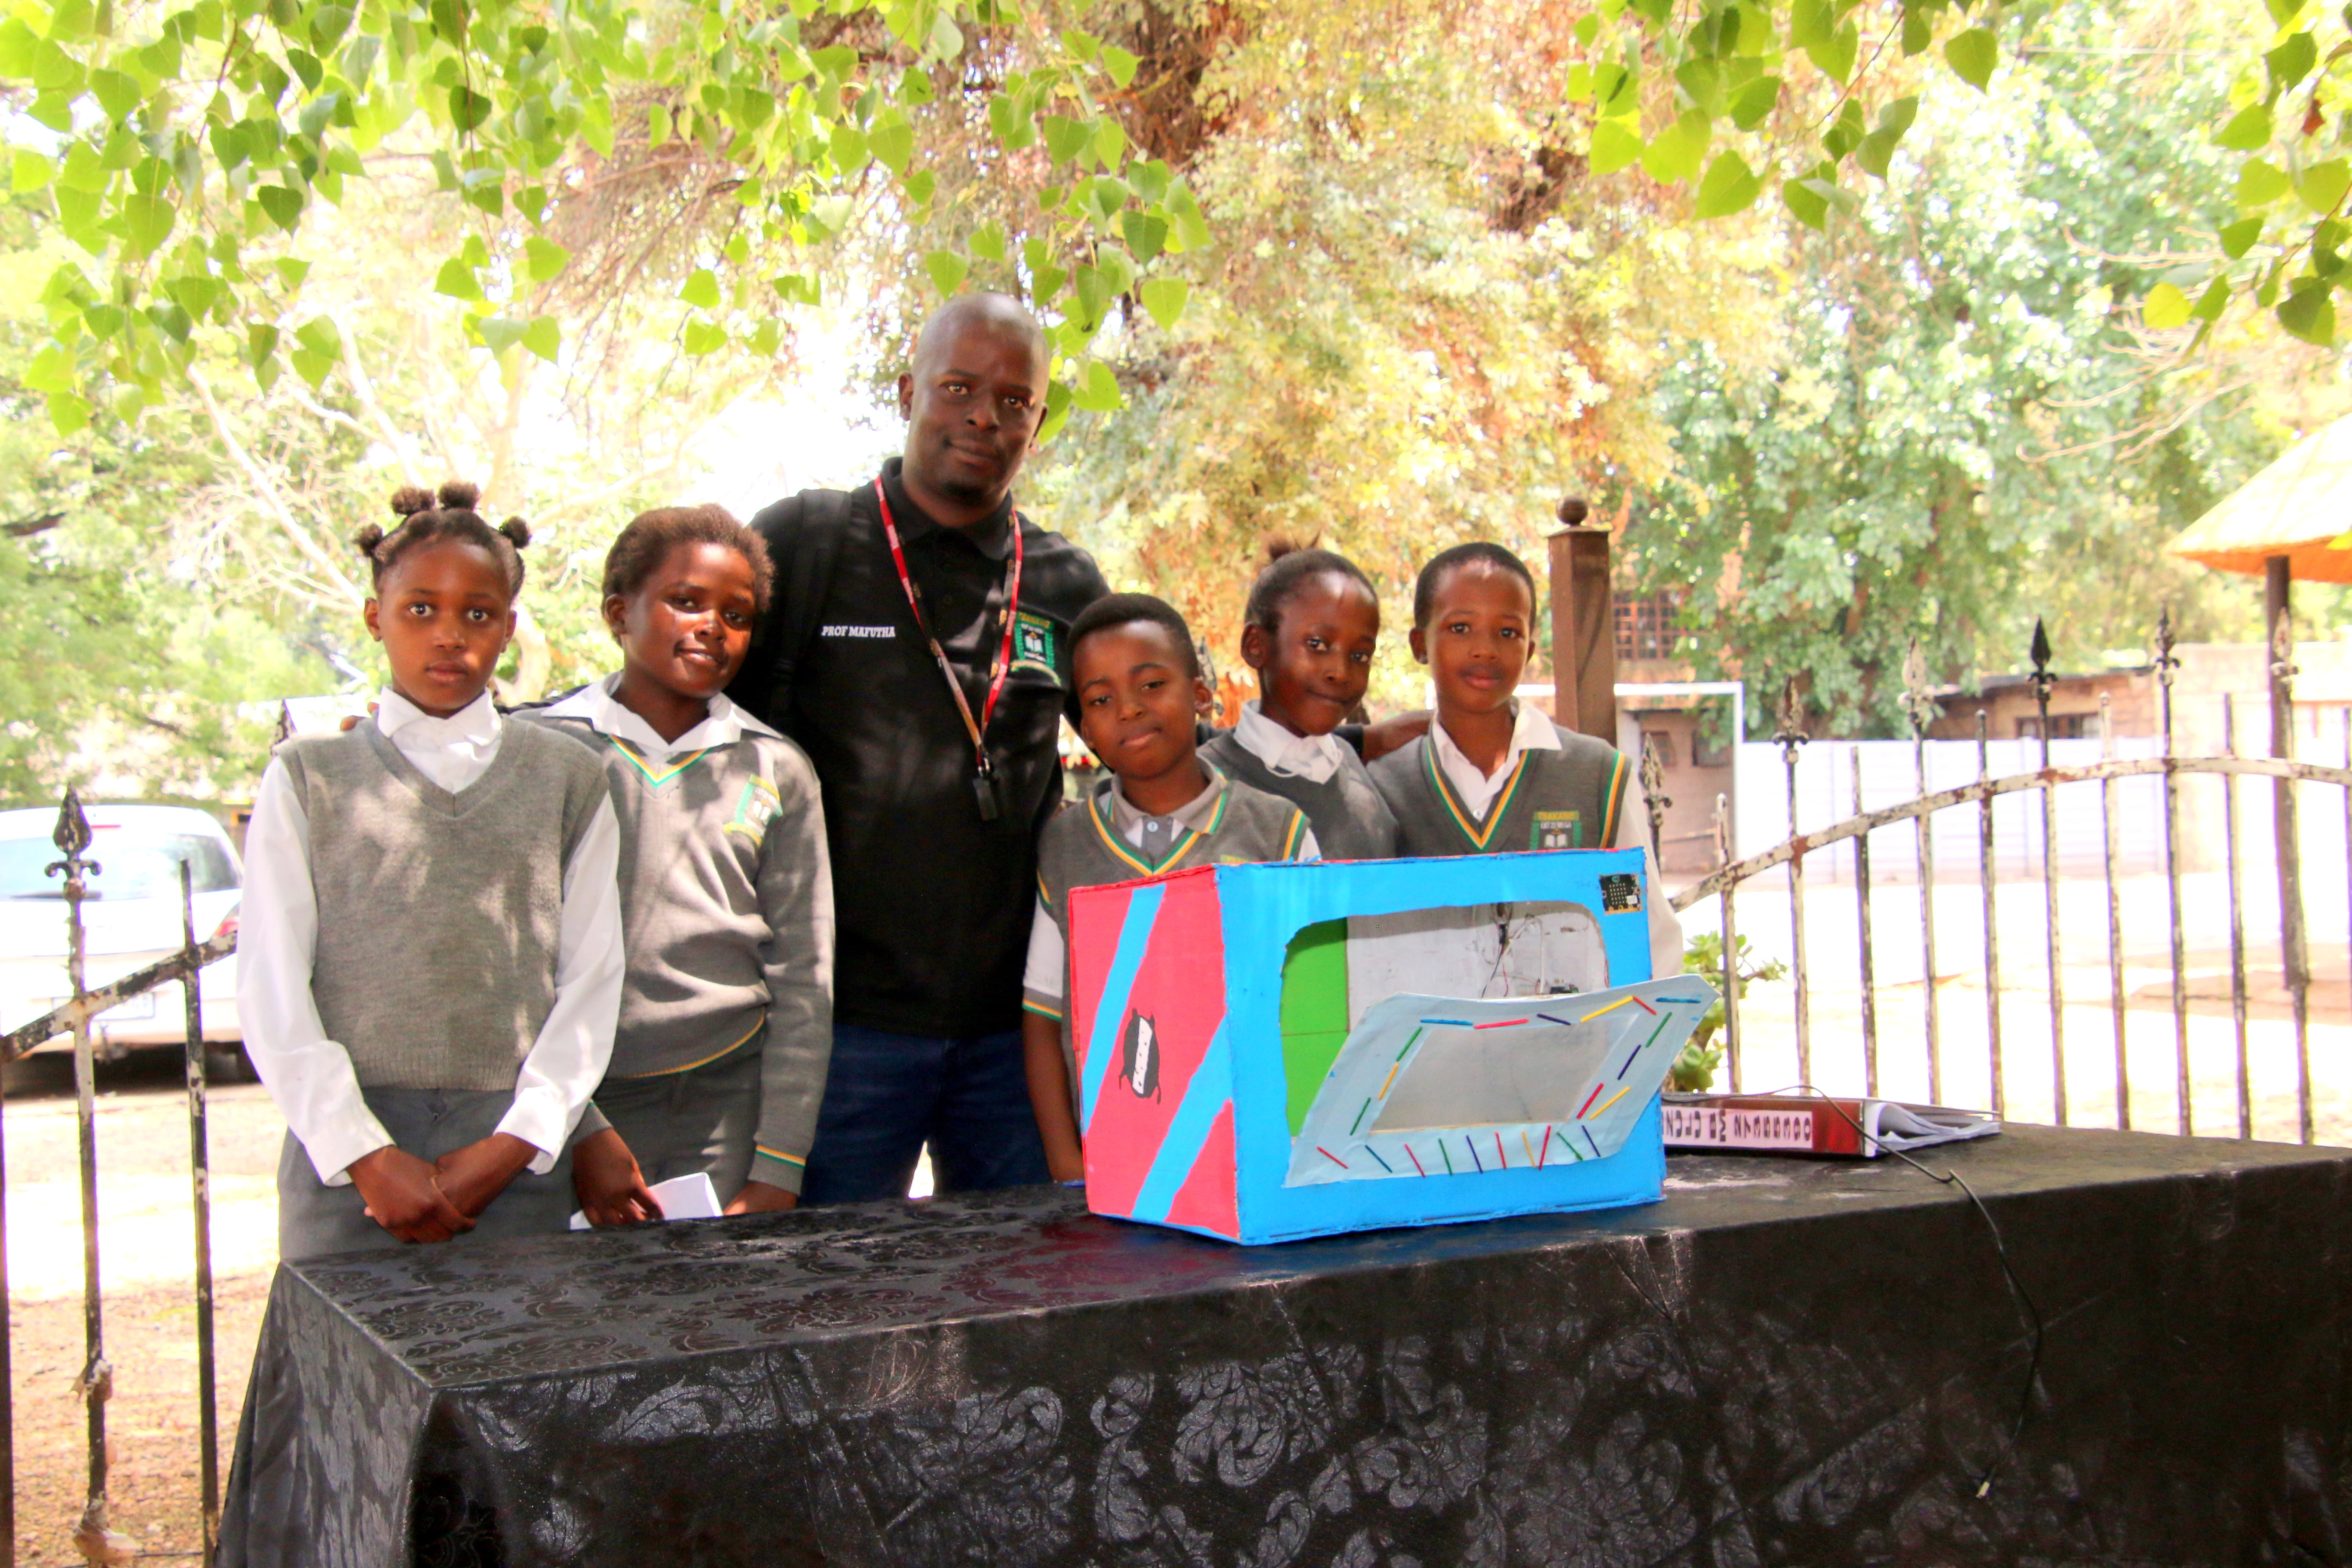 Pupils From Mega Primary School And Educator Bheki Mngomezulu With Their Food Warmer Project.